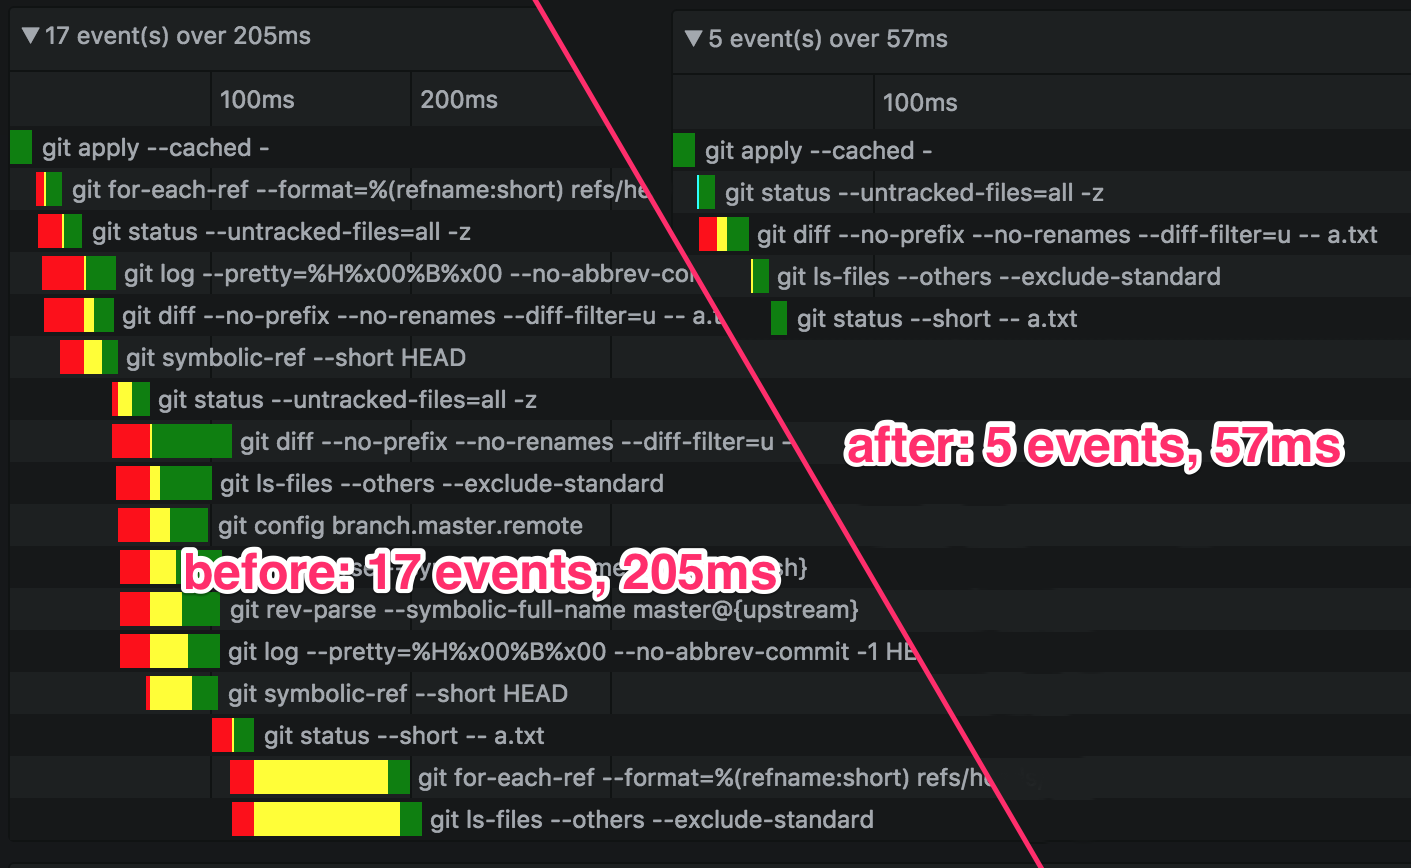 Caching — before 17 events taking 205ms, after 5 events taking 57ms